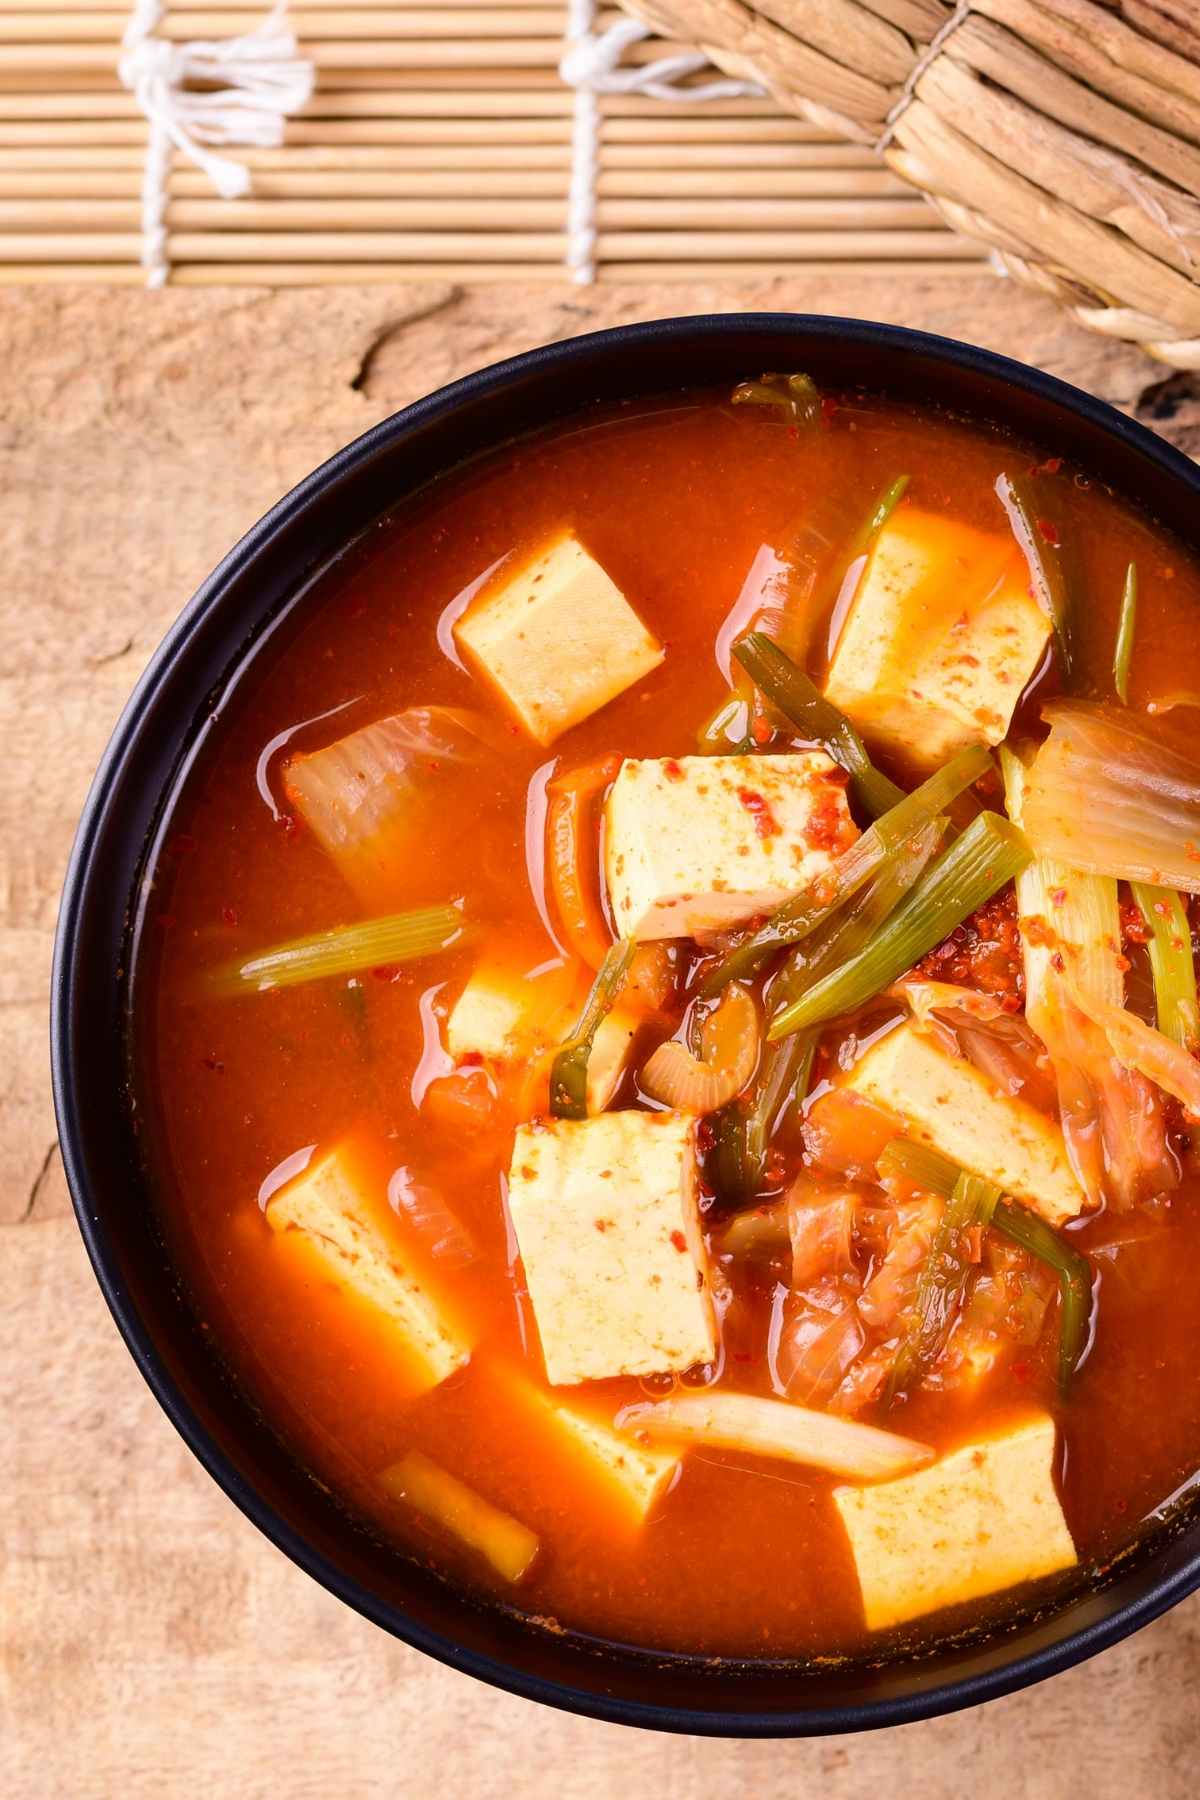 You’ll love the flavors of this Korean Tofu Soup. It’s easy to make and good for you too! The recipe serves four and is ready to enjoy in just 30 minutes.